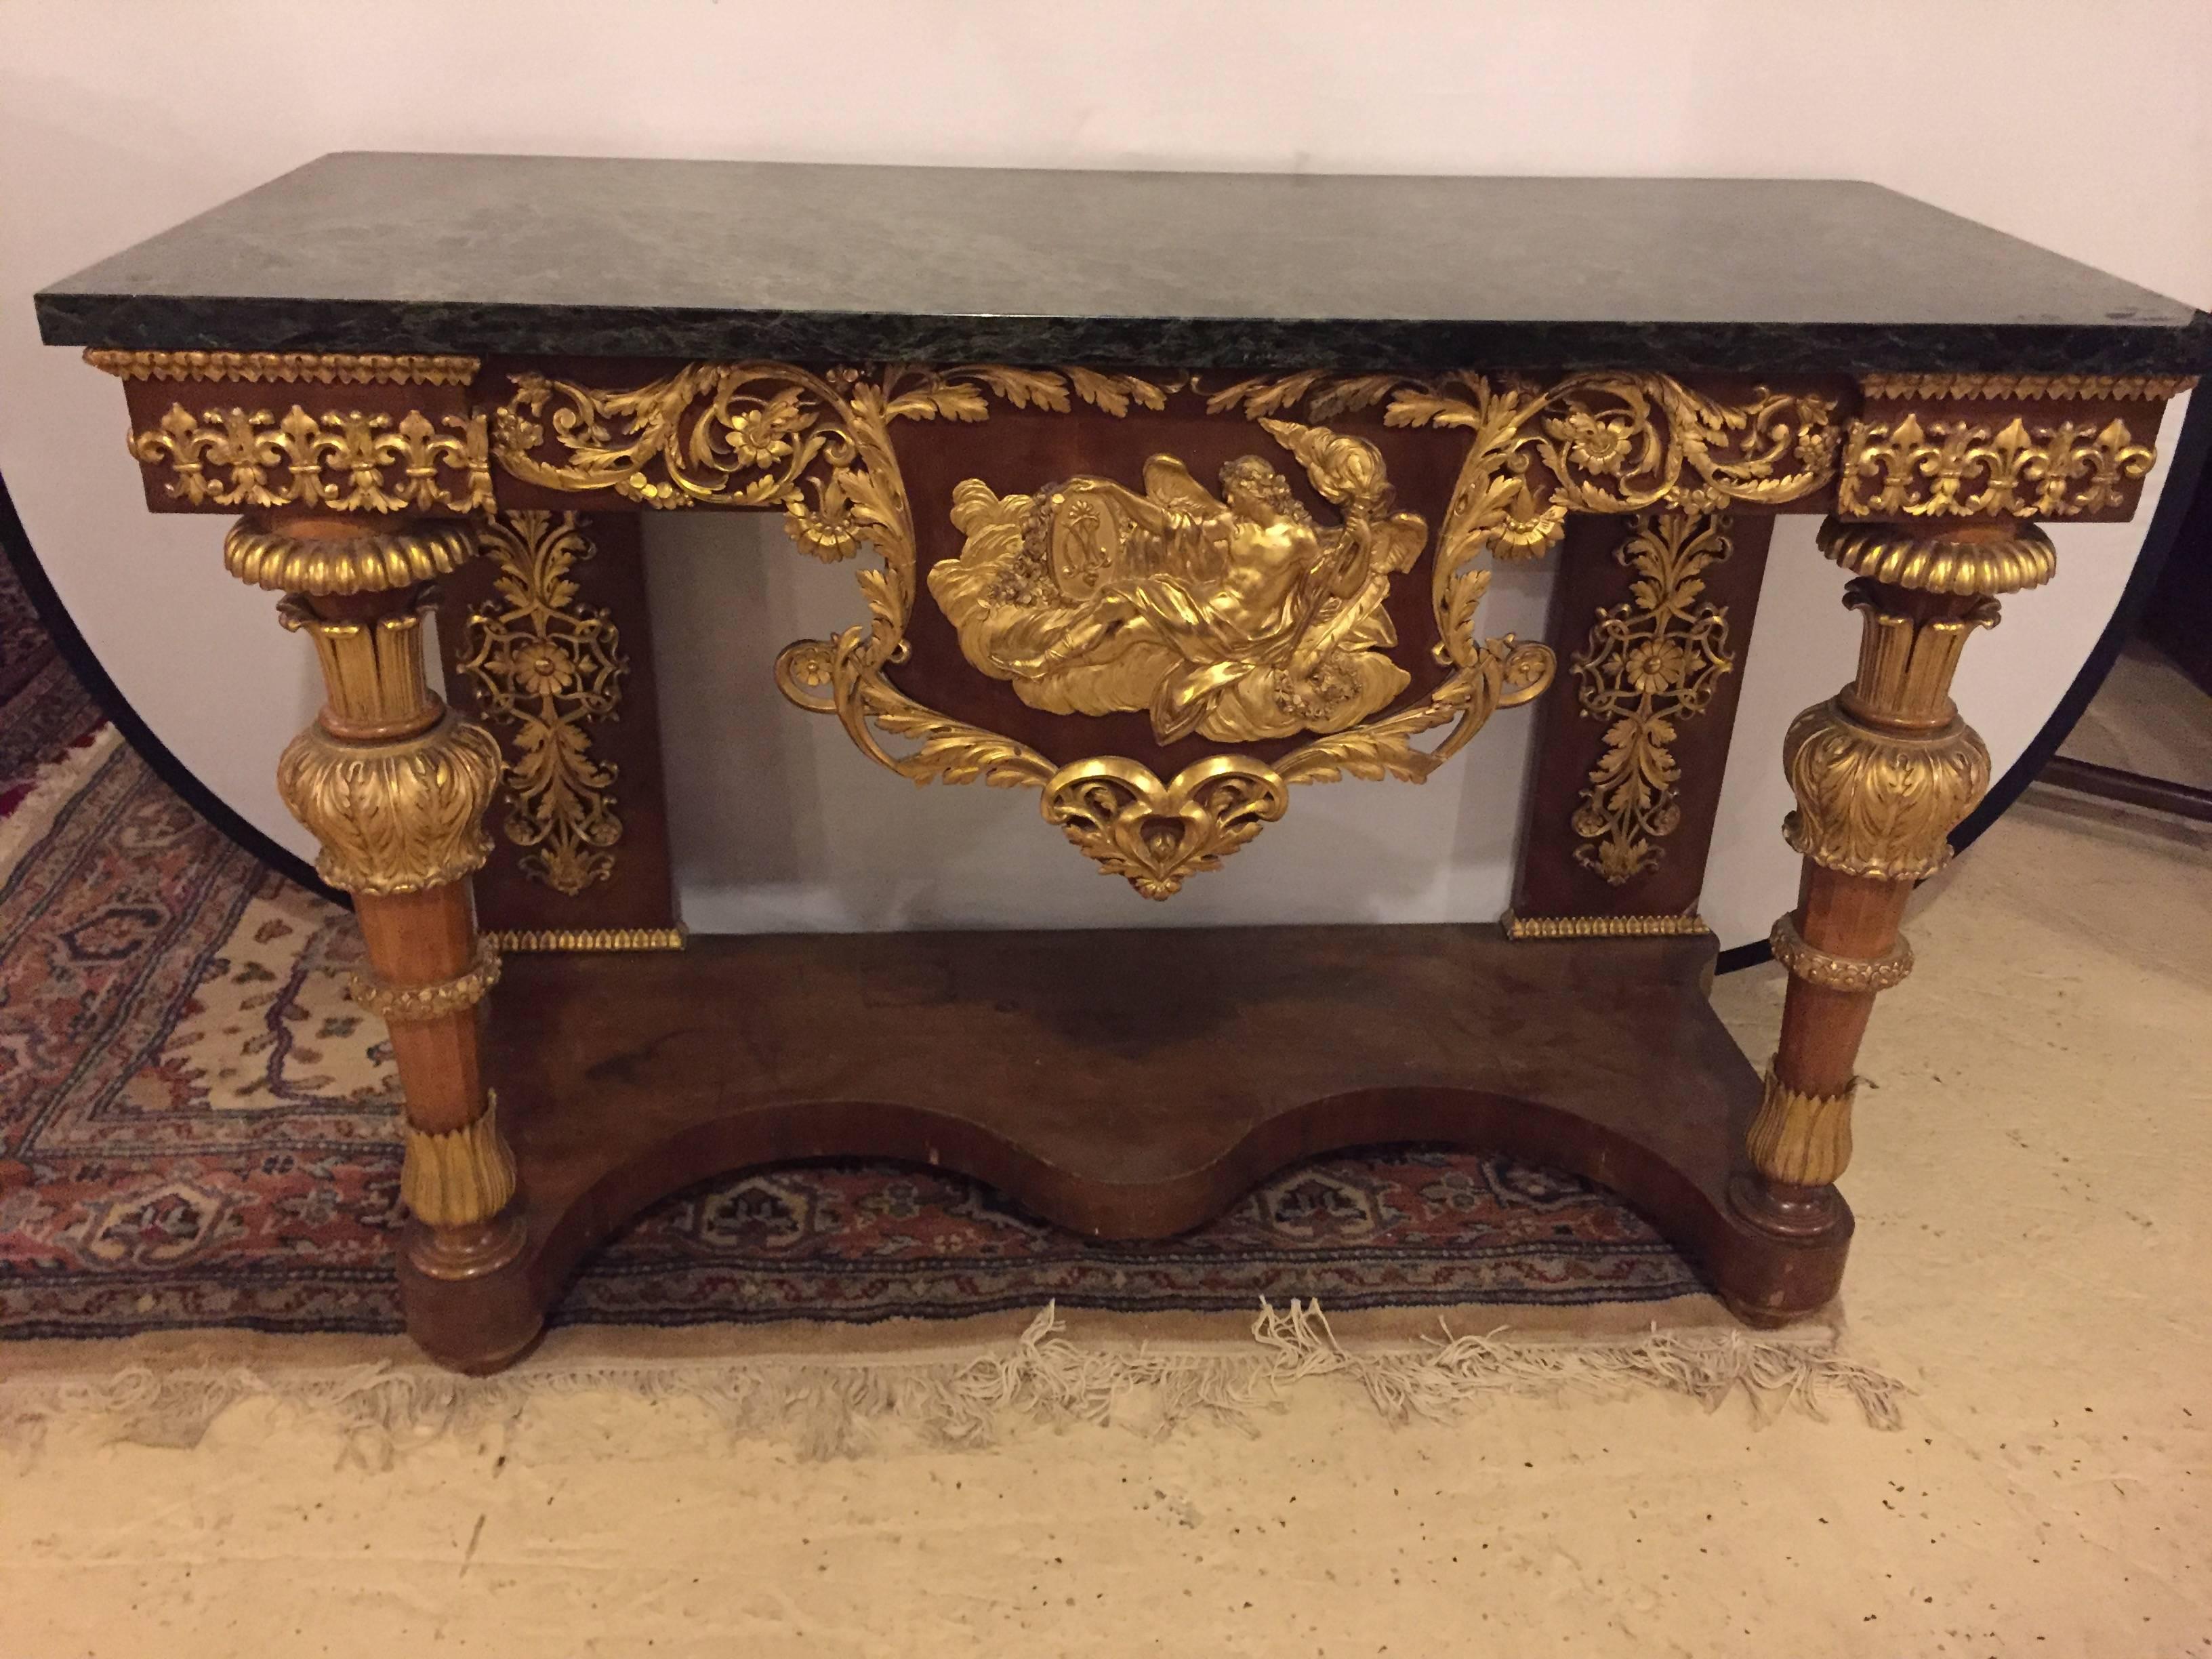 Mahogany 19th Century Empire Marble-Top Console Table with Greek God Design Front